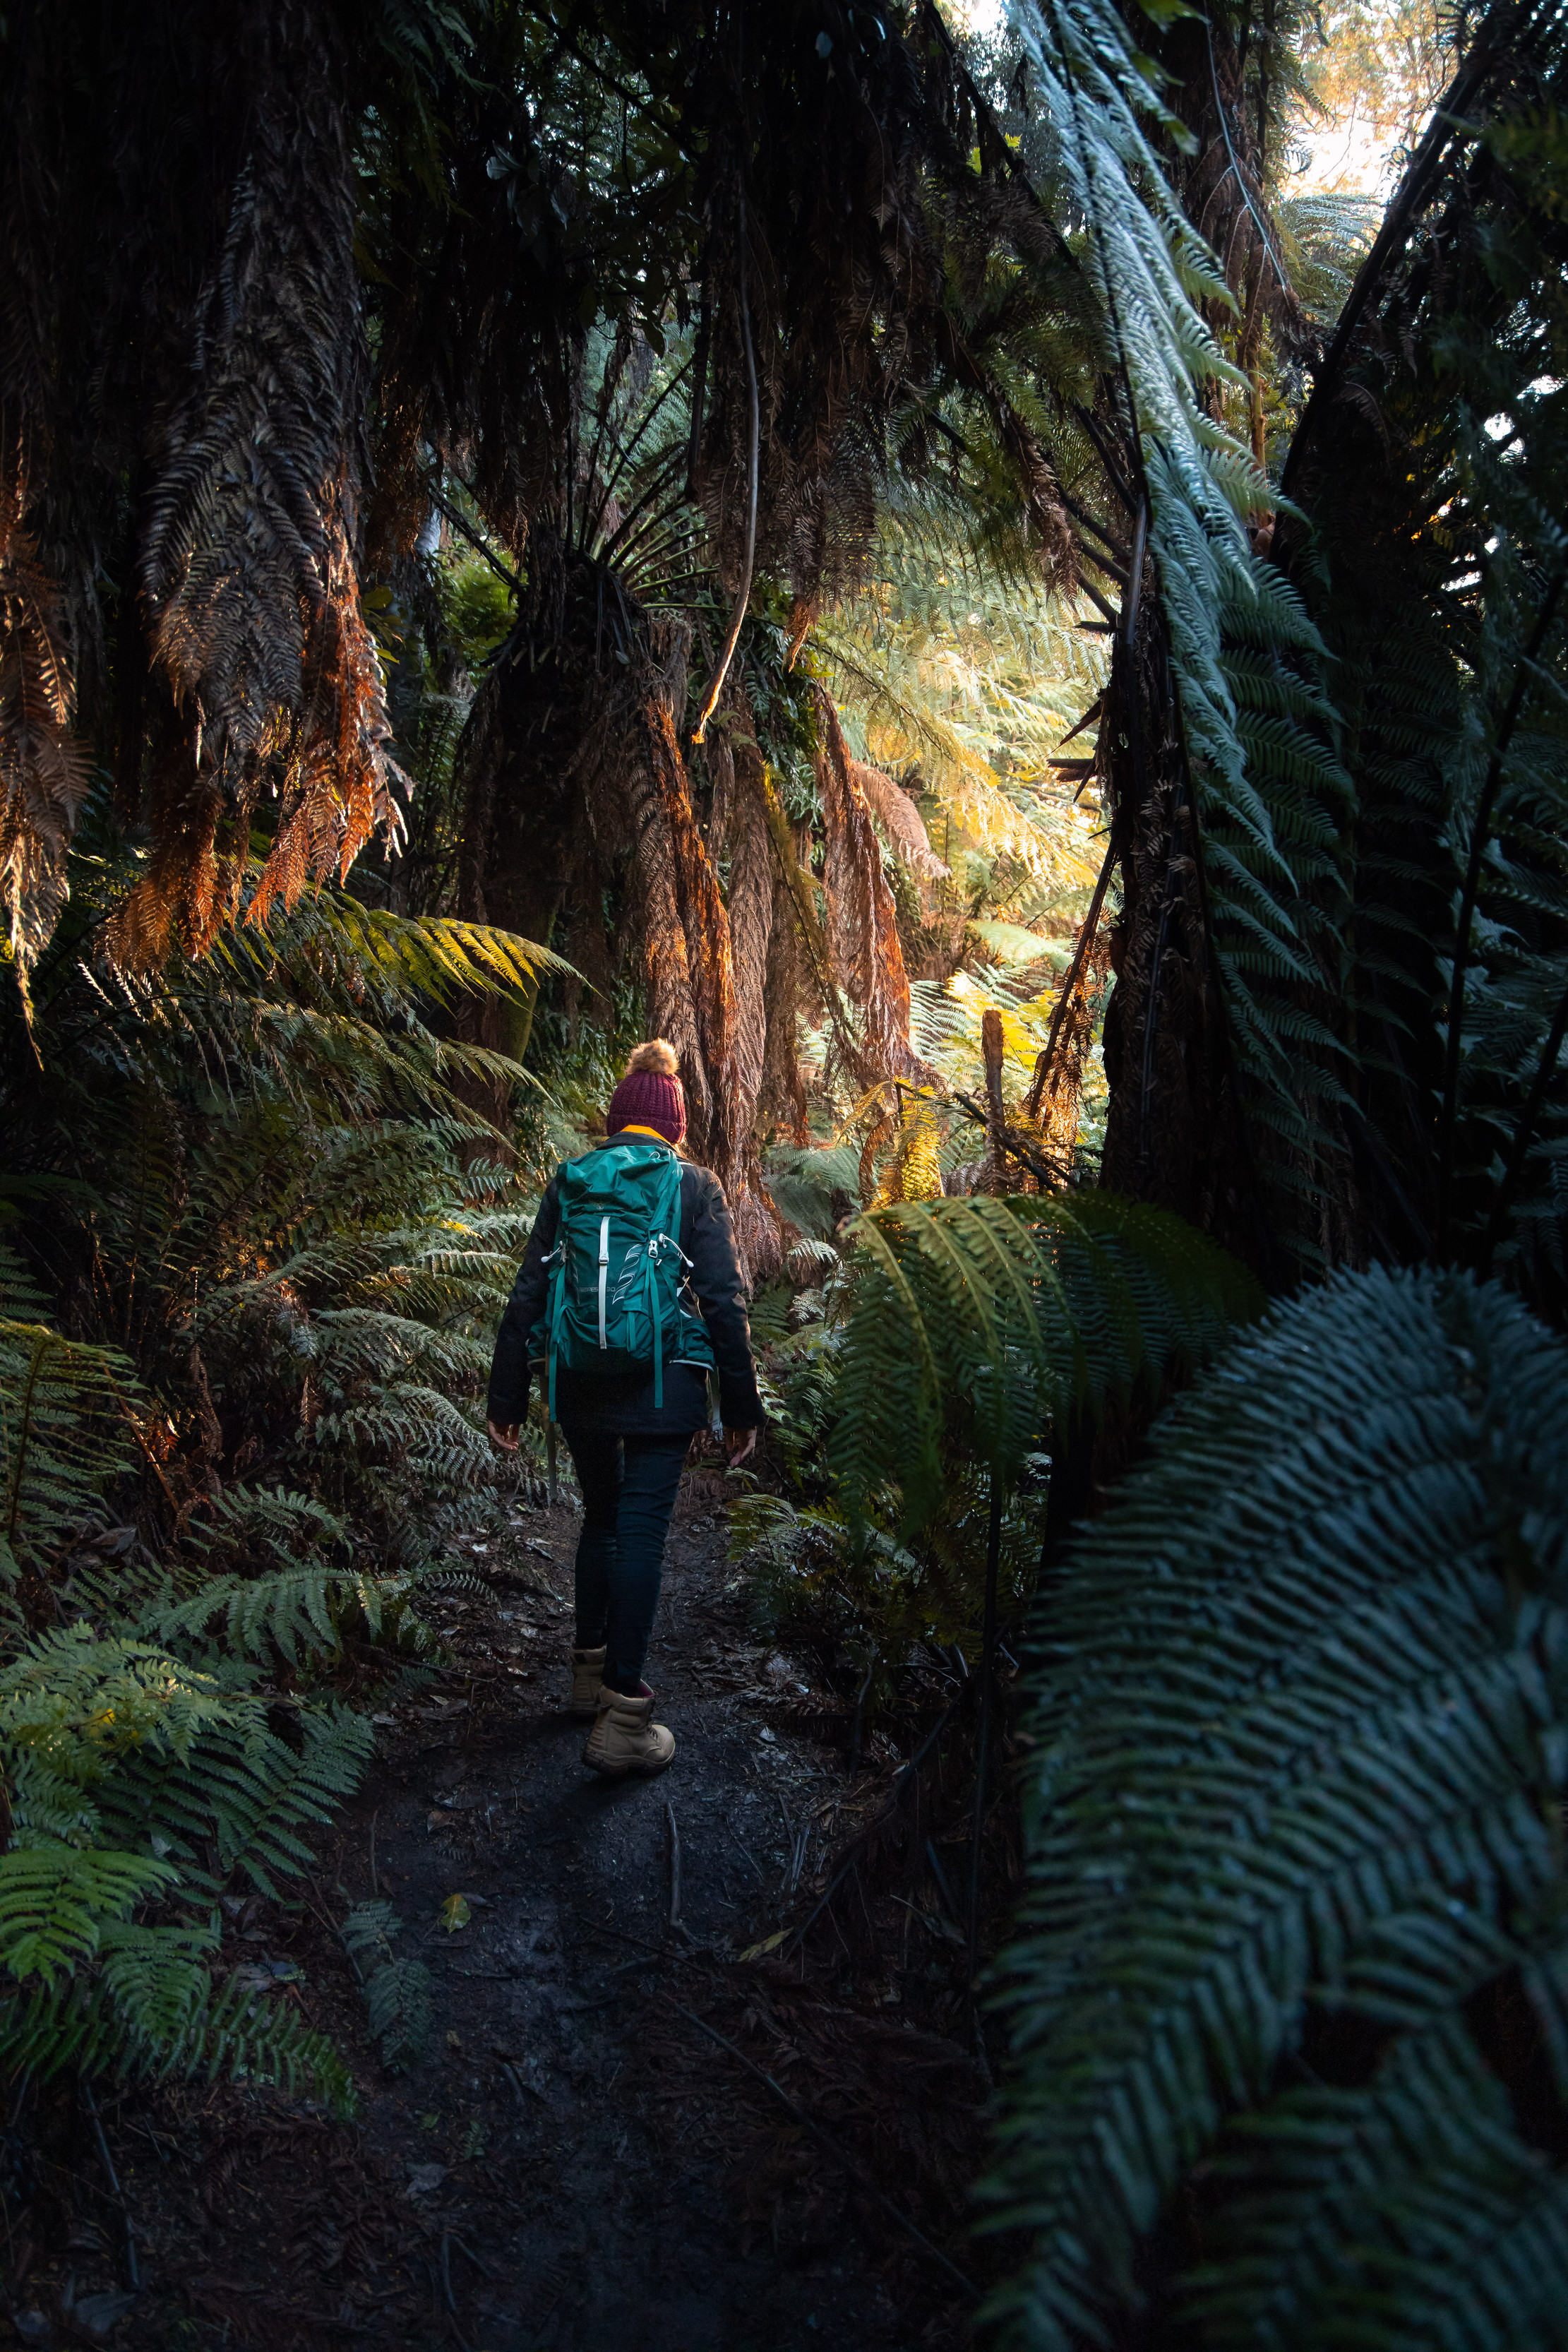 Dramatic image of a person taken from behind, walking through Liffey Falls out into the light, surrounded by dense fern forest.